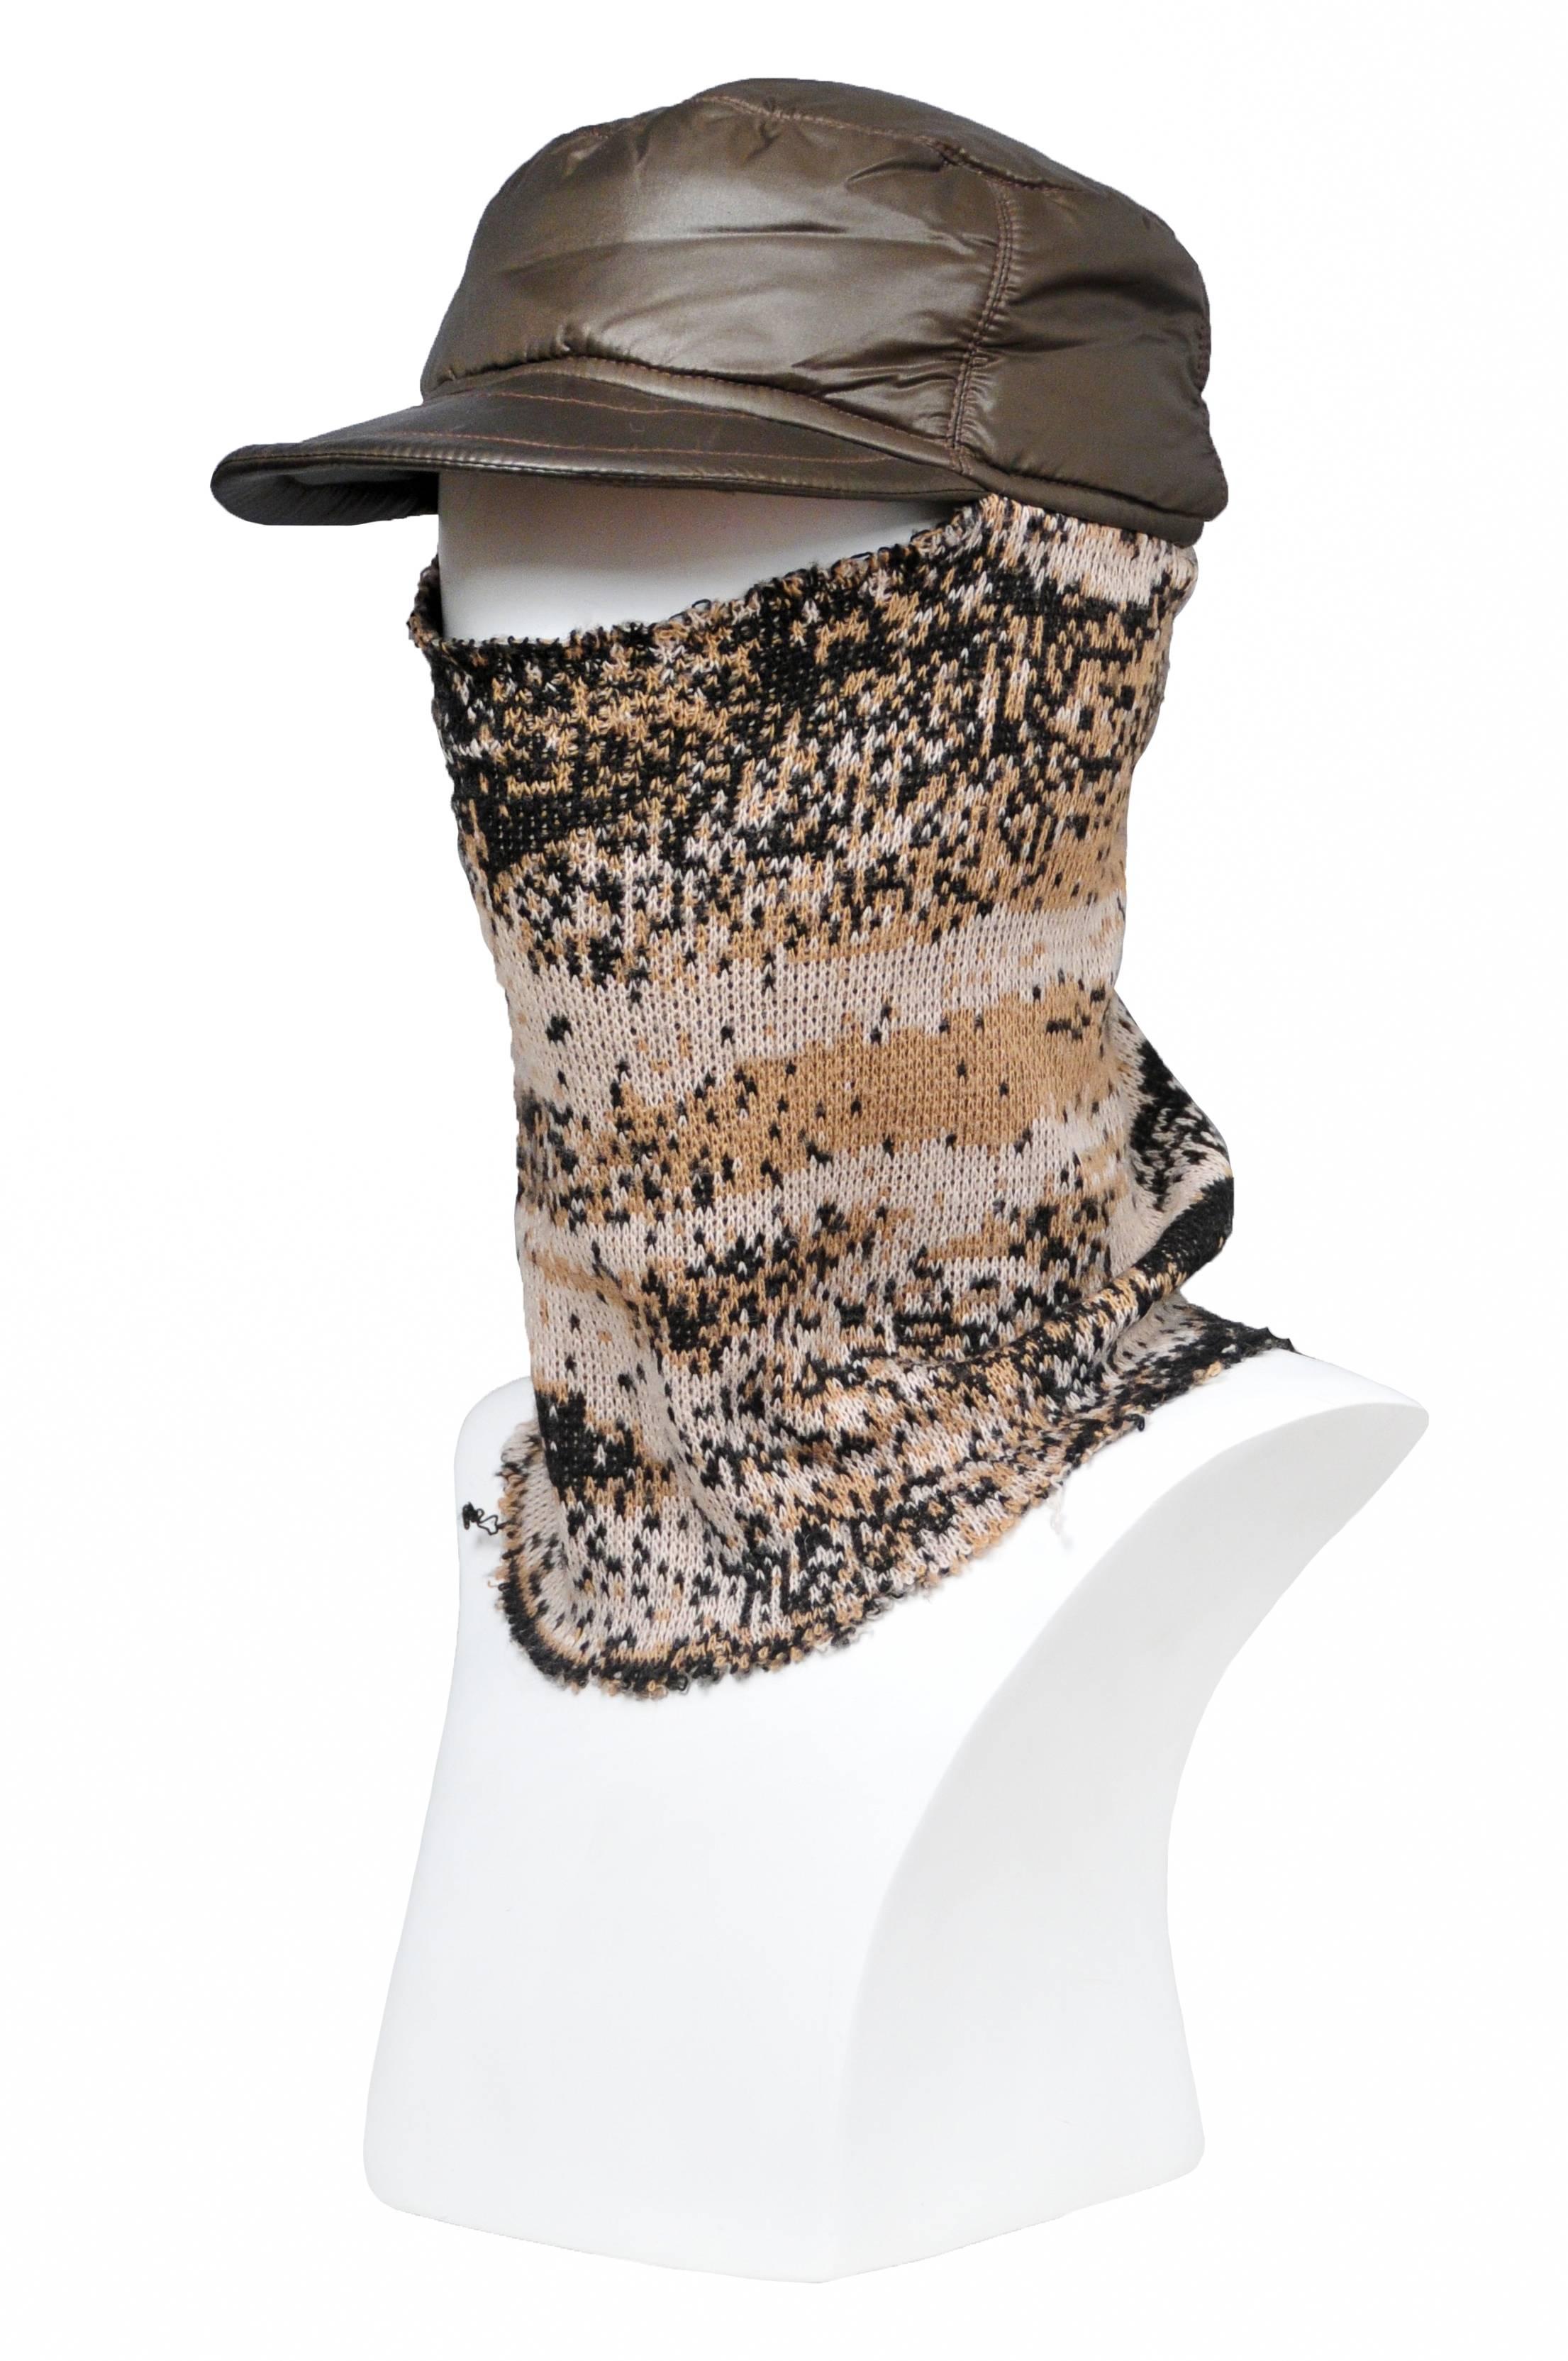 Raf Simons brown nylon hat with bill and attached digital camouflage knit print scarf or balaclava. Easy fit. Excellent condition. Circa 2002-03.
